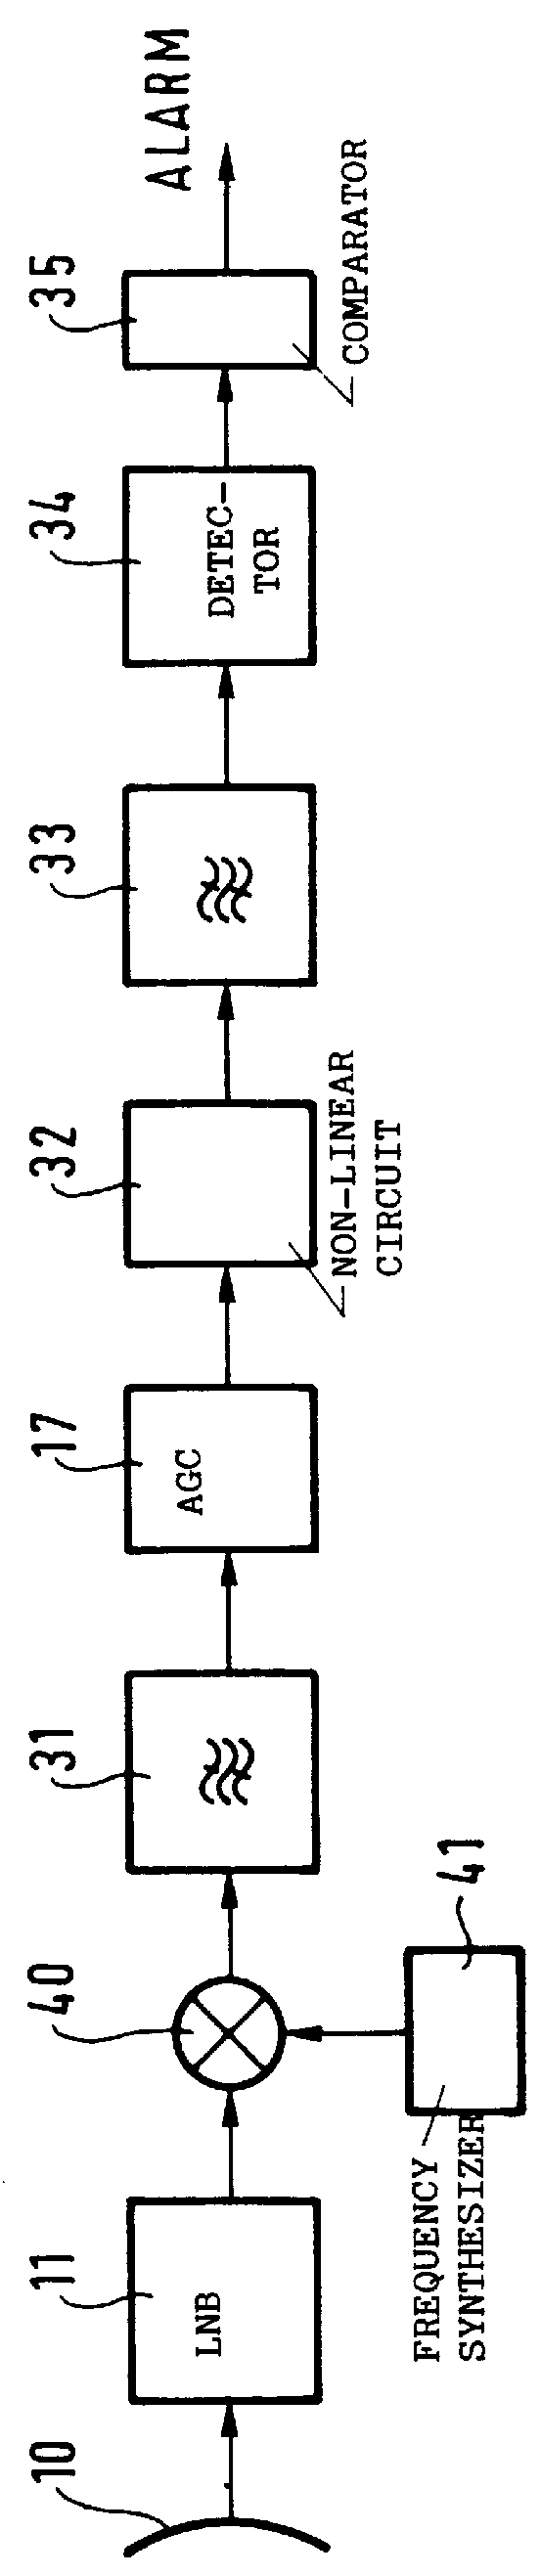 Apparatus for detecting the presence or the absence of a digitally modulated carrier, a corresponding receiver, and a corresponding method